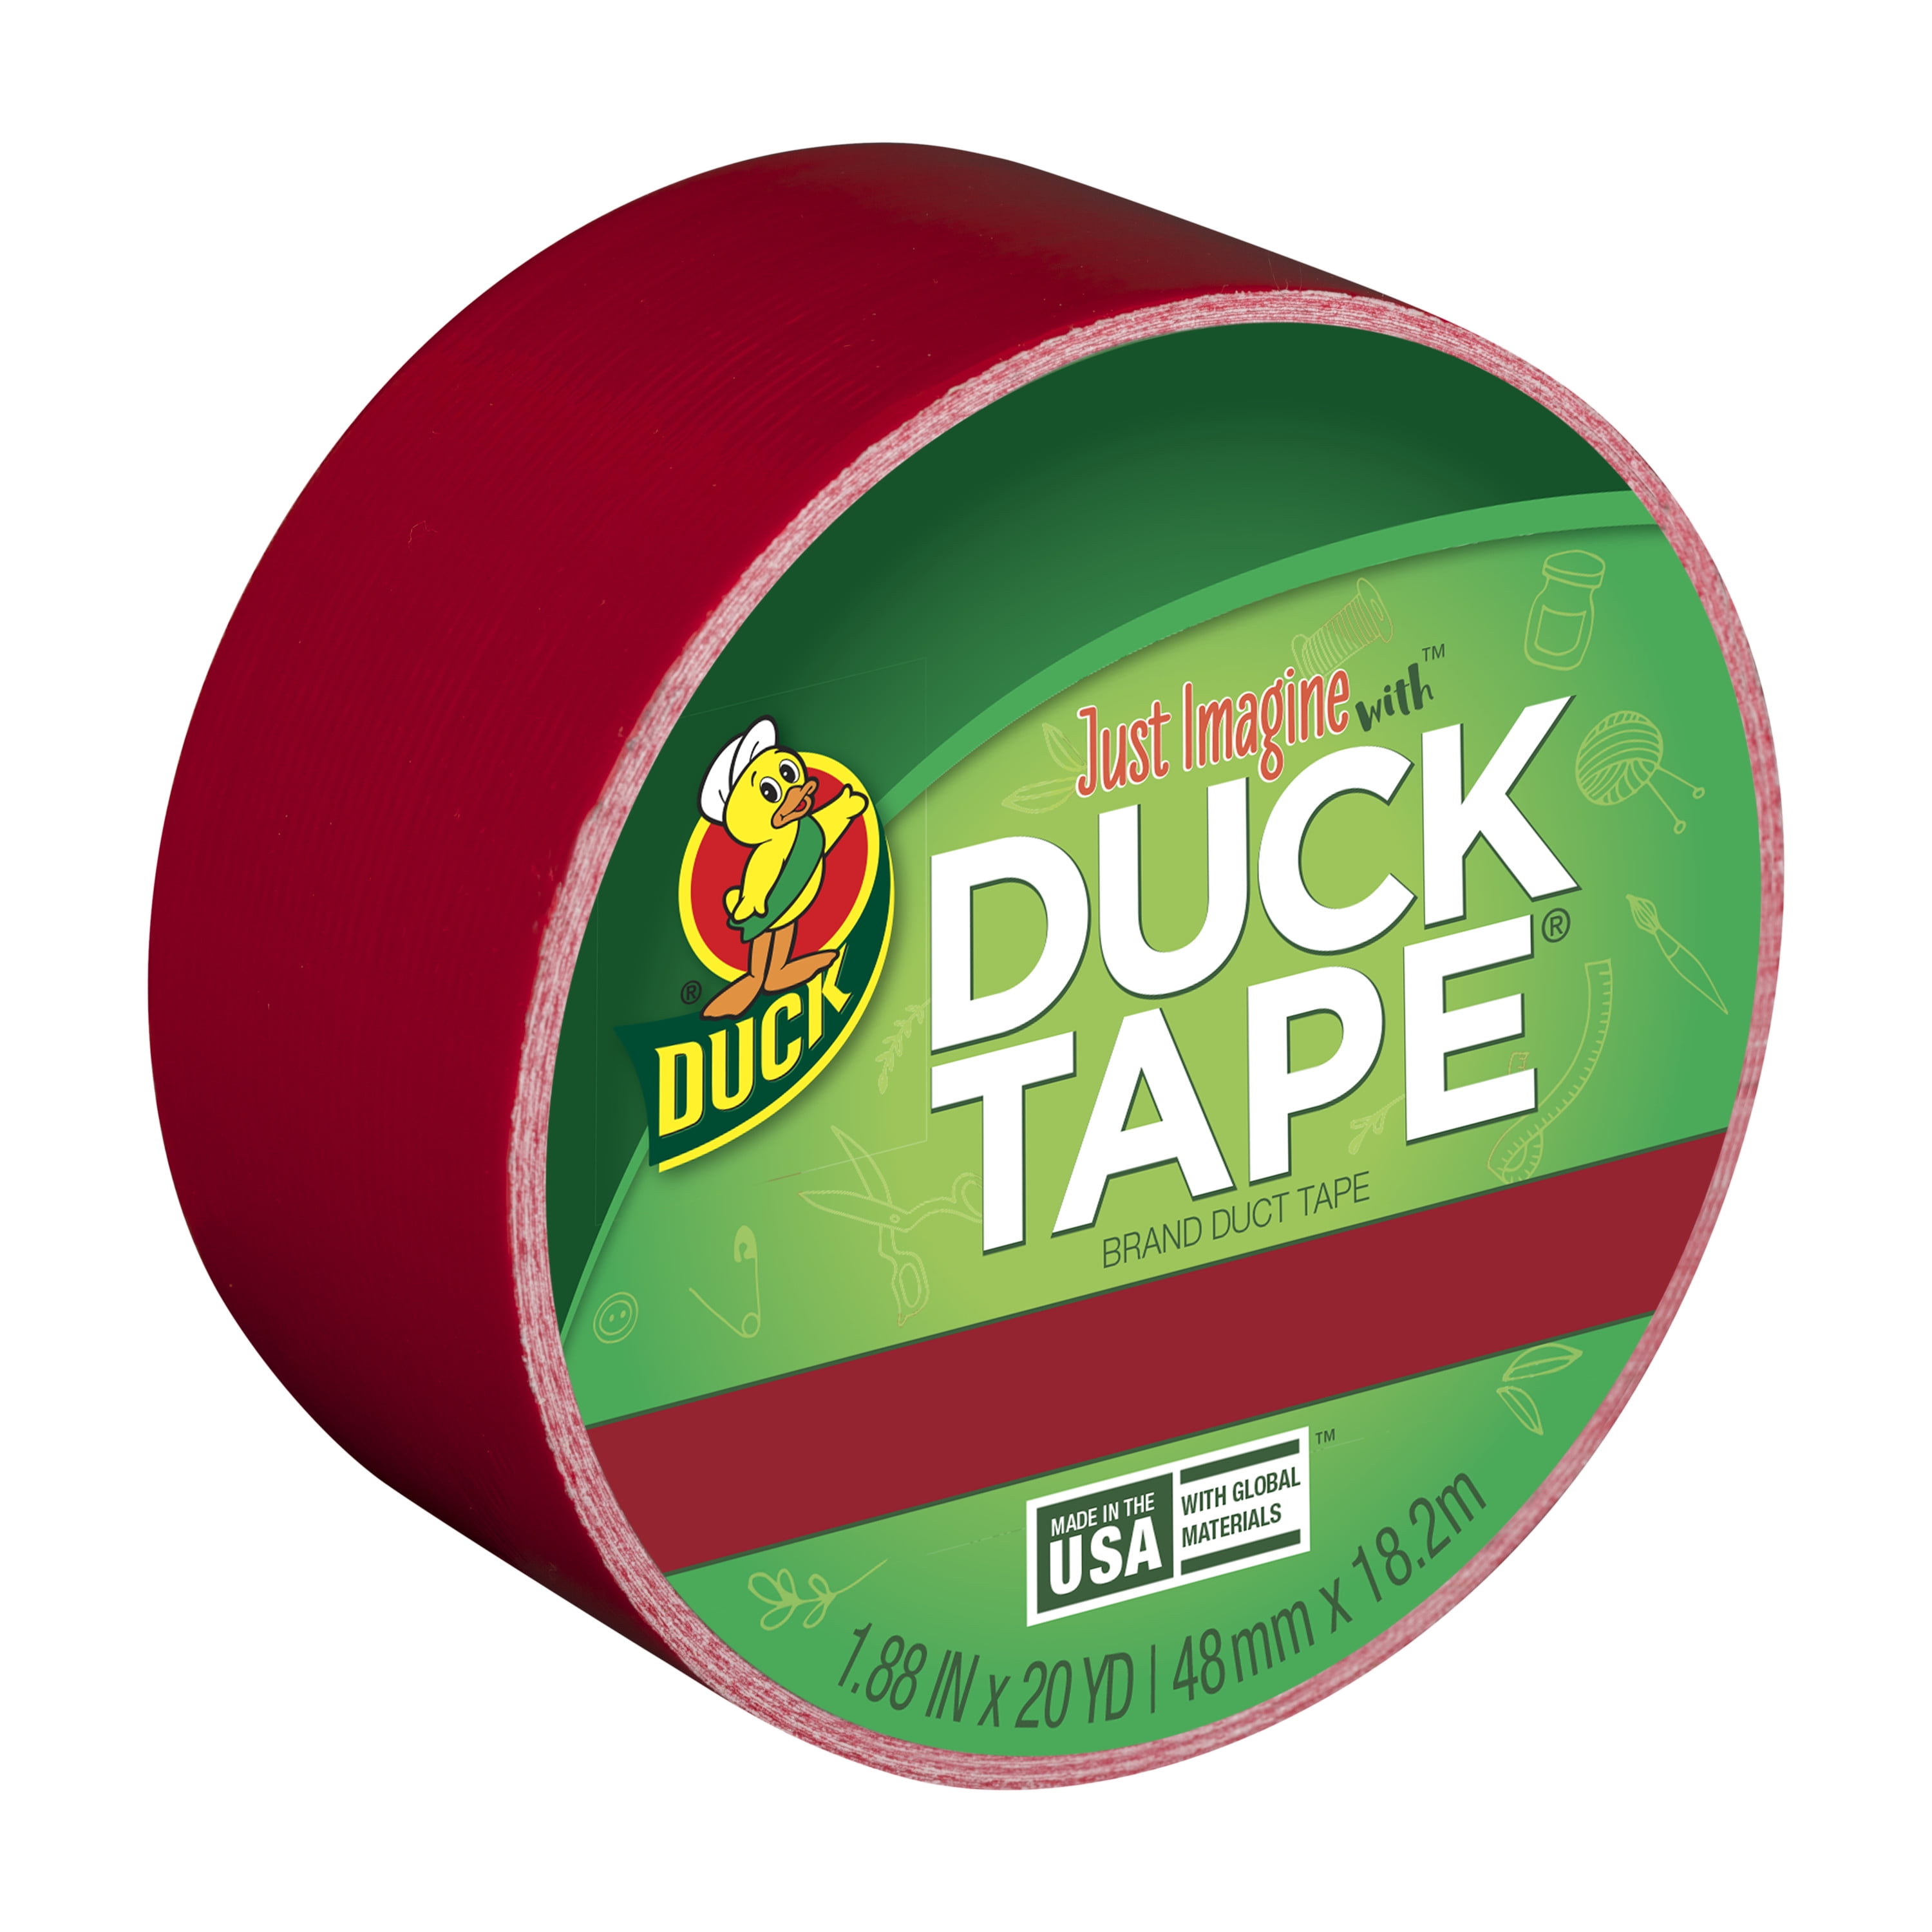 Gray Silver All Purpose Duck brand Duct Tape 1.88 inch x 20 yds 